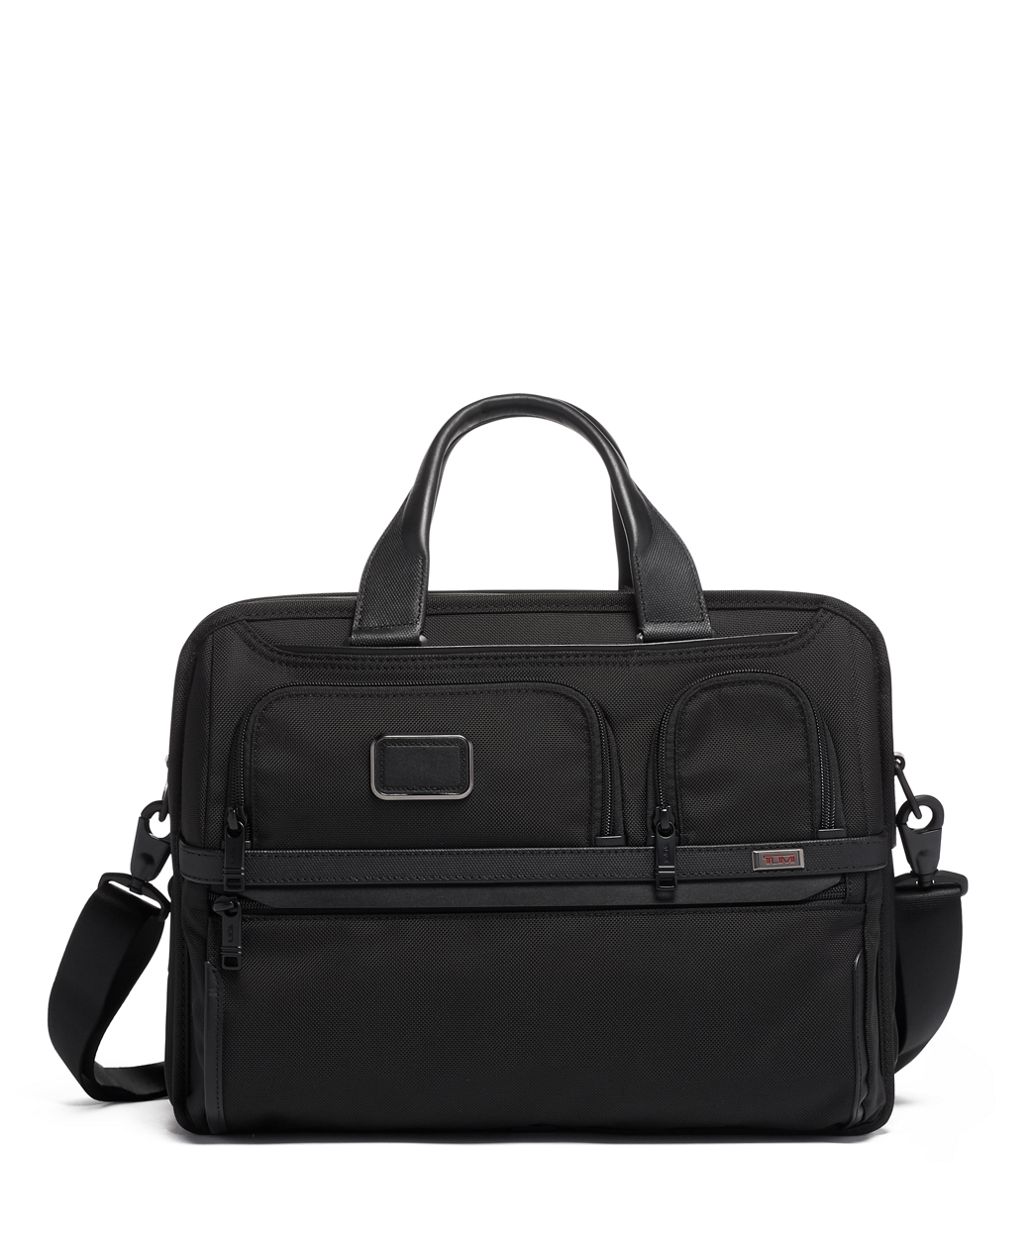 TUMI Brief Pack Review